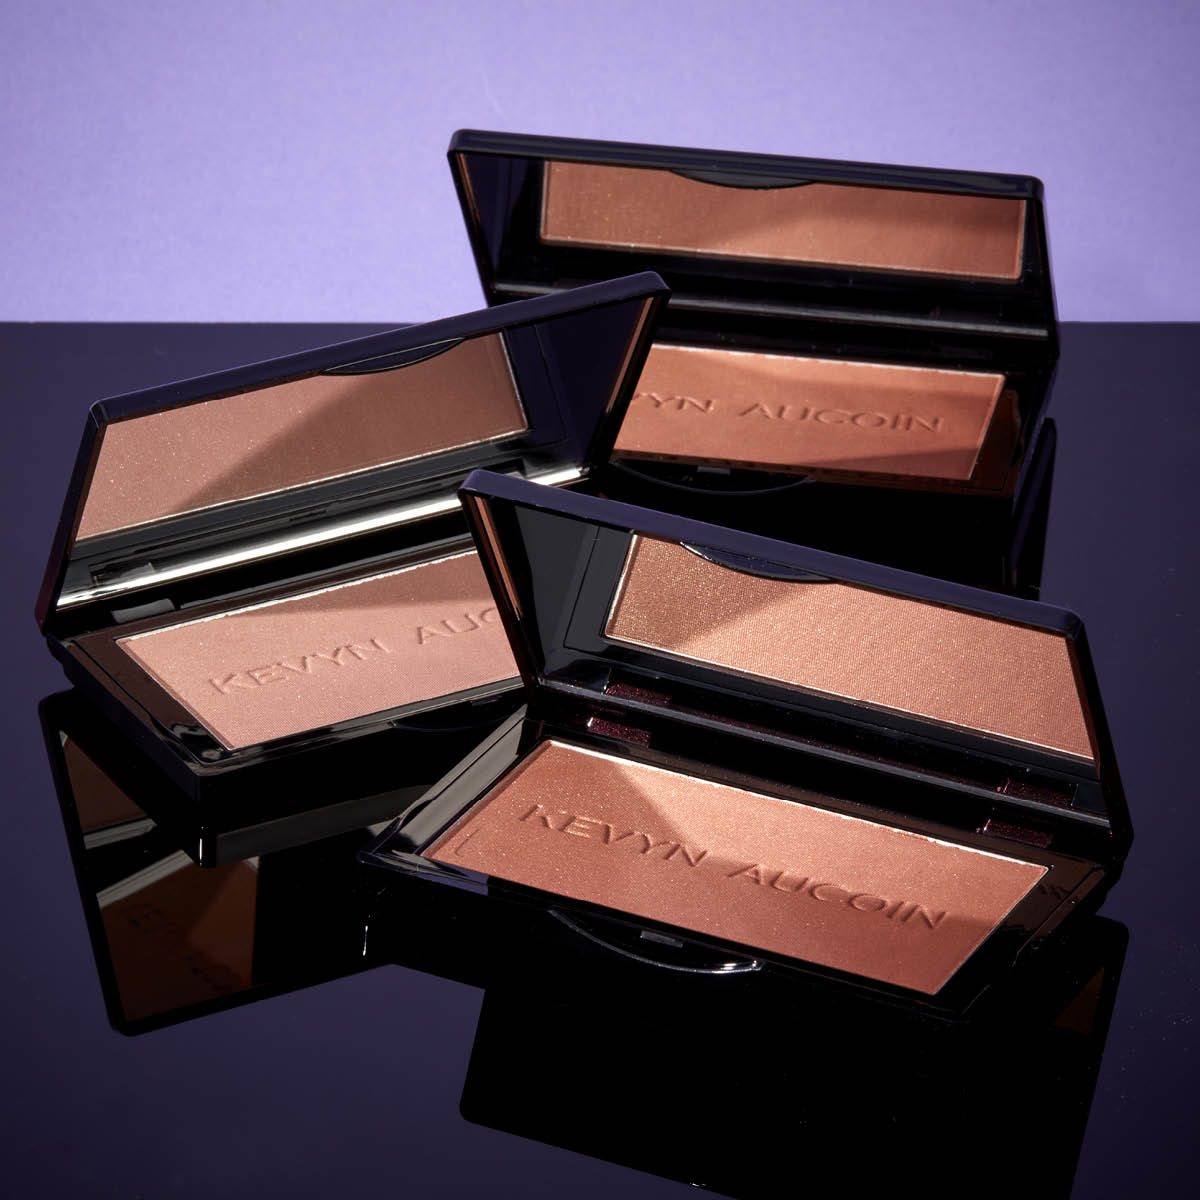 Go from naturally sun-kissed to tropically-bronzed with our brand new Neo-Bronzers. Shop these palettes, named Sunrise Light, Dusk Medium, and Sundown Deep now online @sephora here: seph.me/2uUEJxK